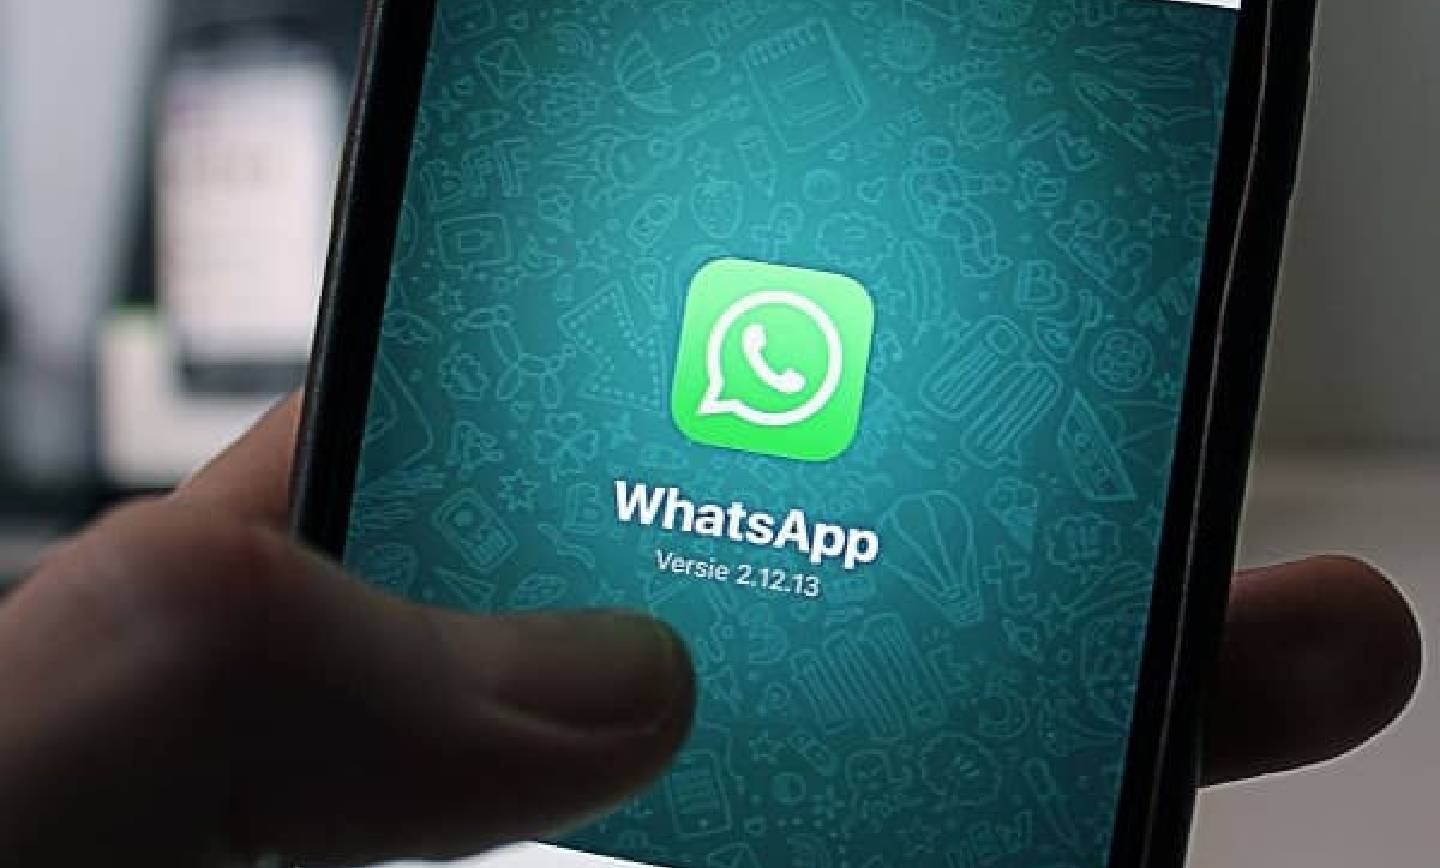 Everything about WhatsApp